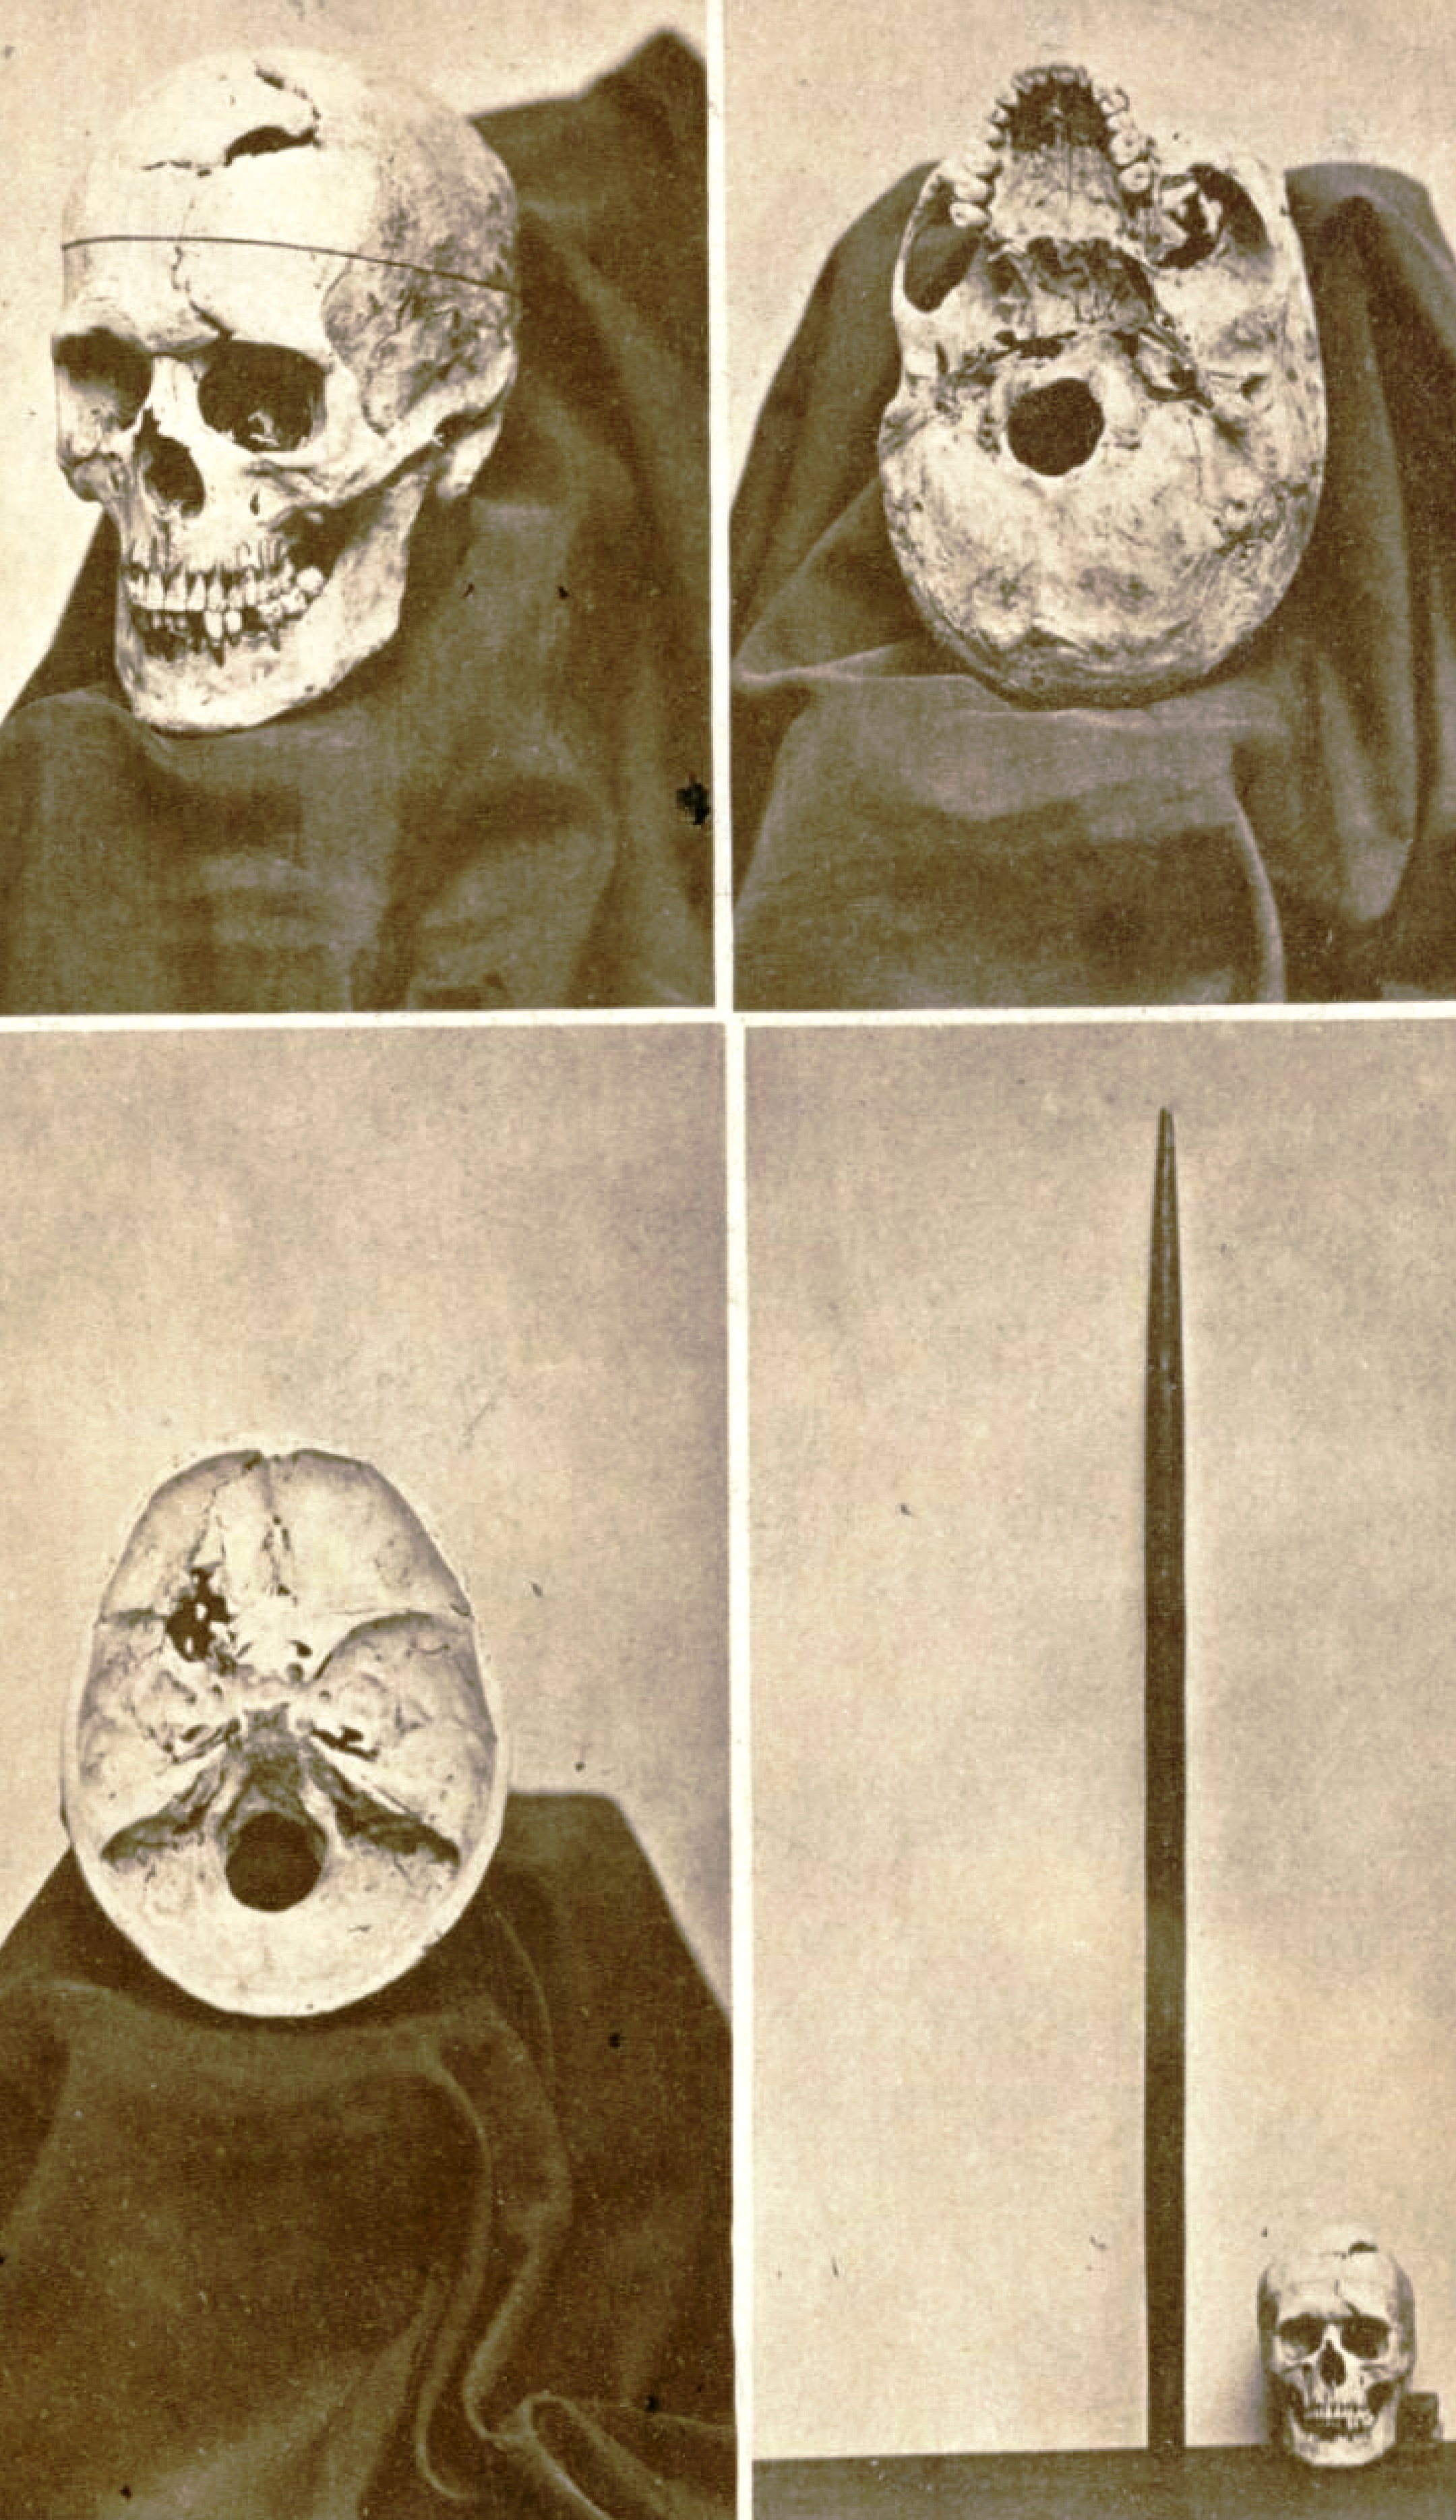 Phineas Gage's skull and tamping iron